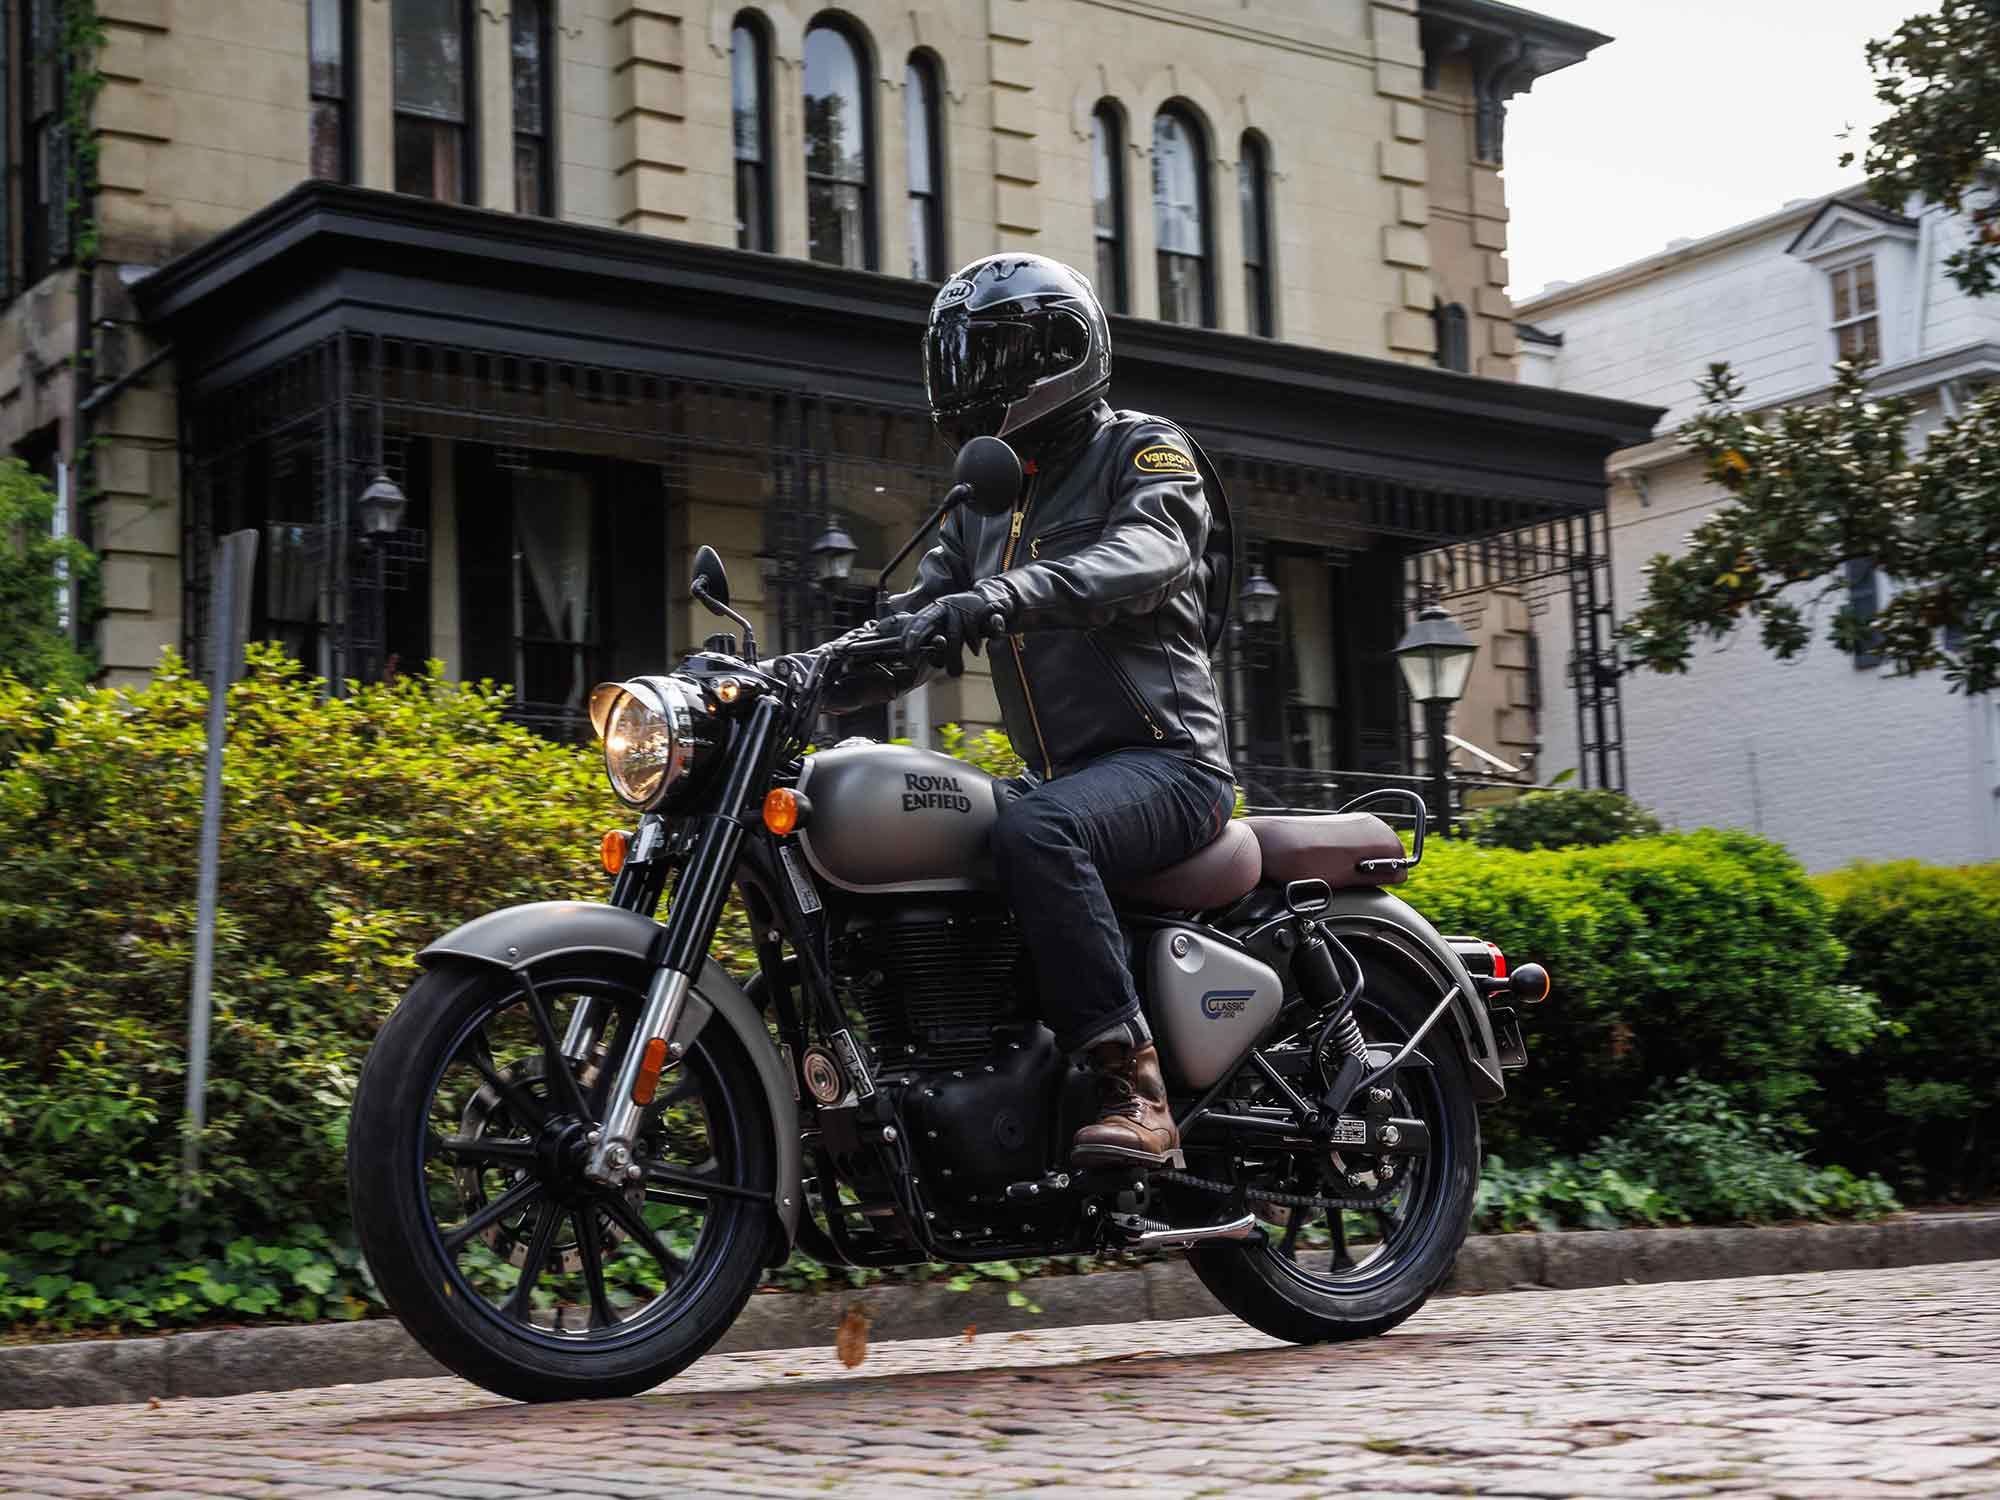 With a 31.7-inch seat height, the Classic 350 is accessible for riders with shorter inseams. One of the testbikes had a lower accessory seat installed, and a 5-foot-4 tester had no problem flat-footing. The rider triangle is generous, so even larger riders felt comfortable.